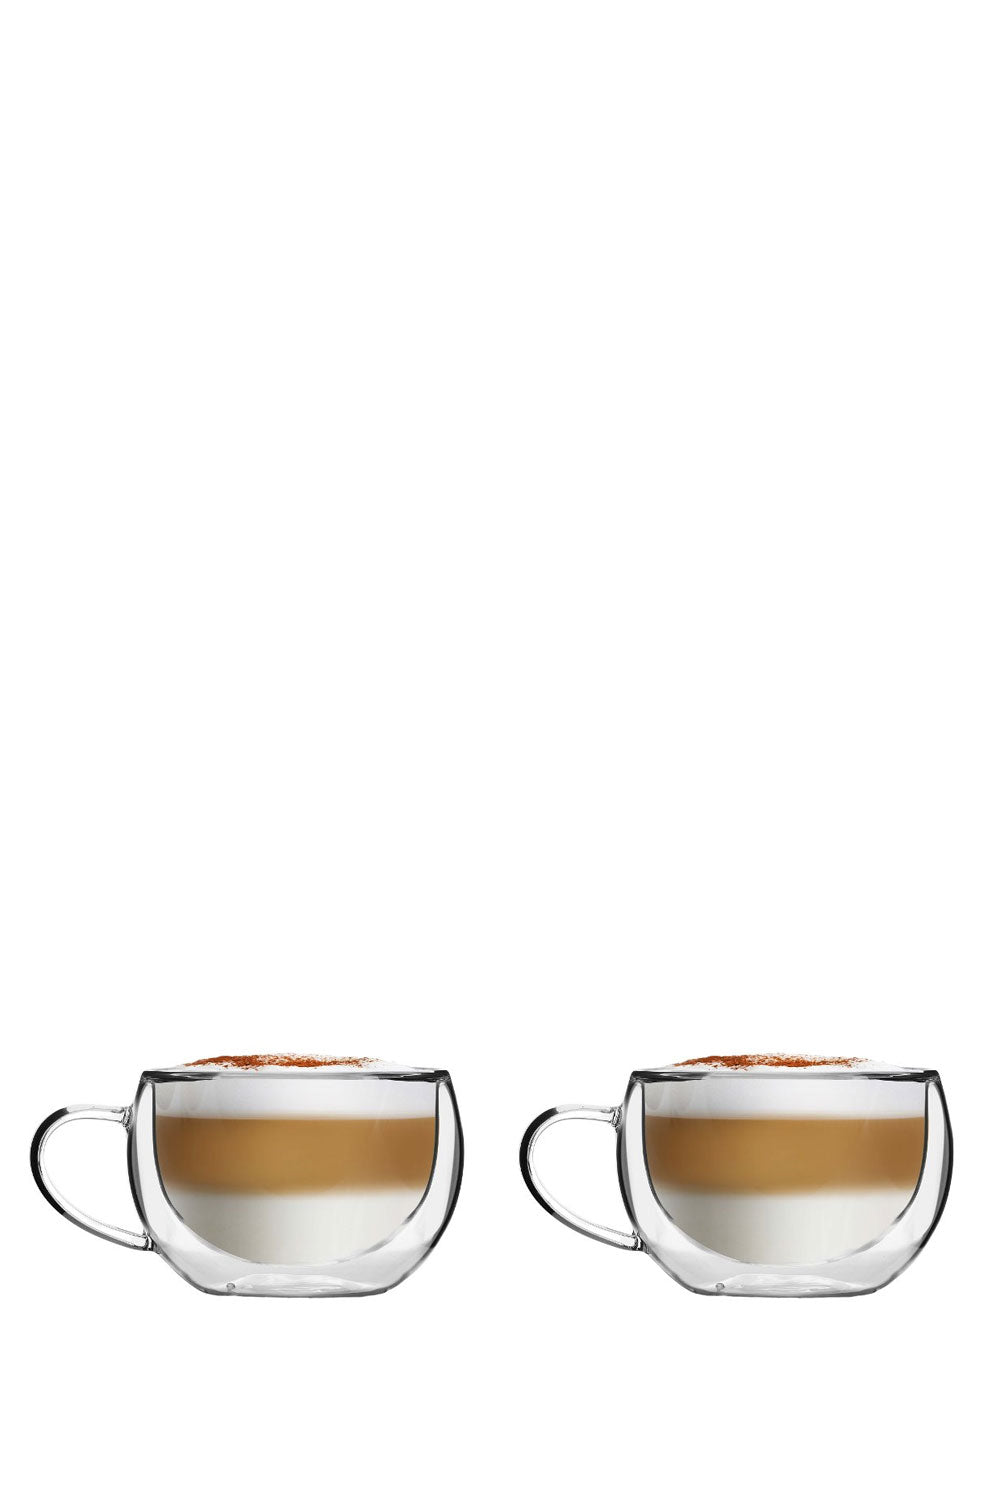 Bolla Double Wall Cups 300 ml, Set of 2 - Maison7